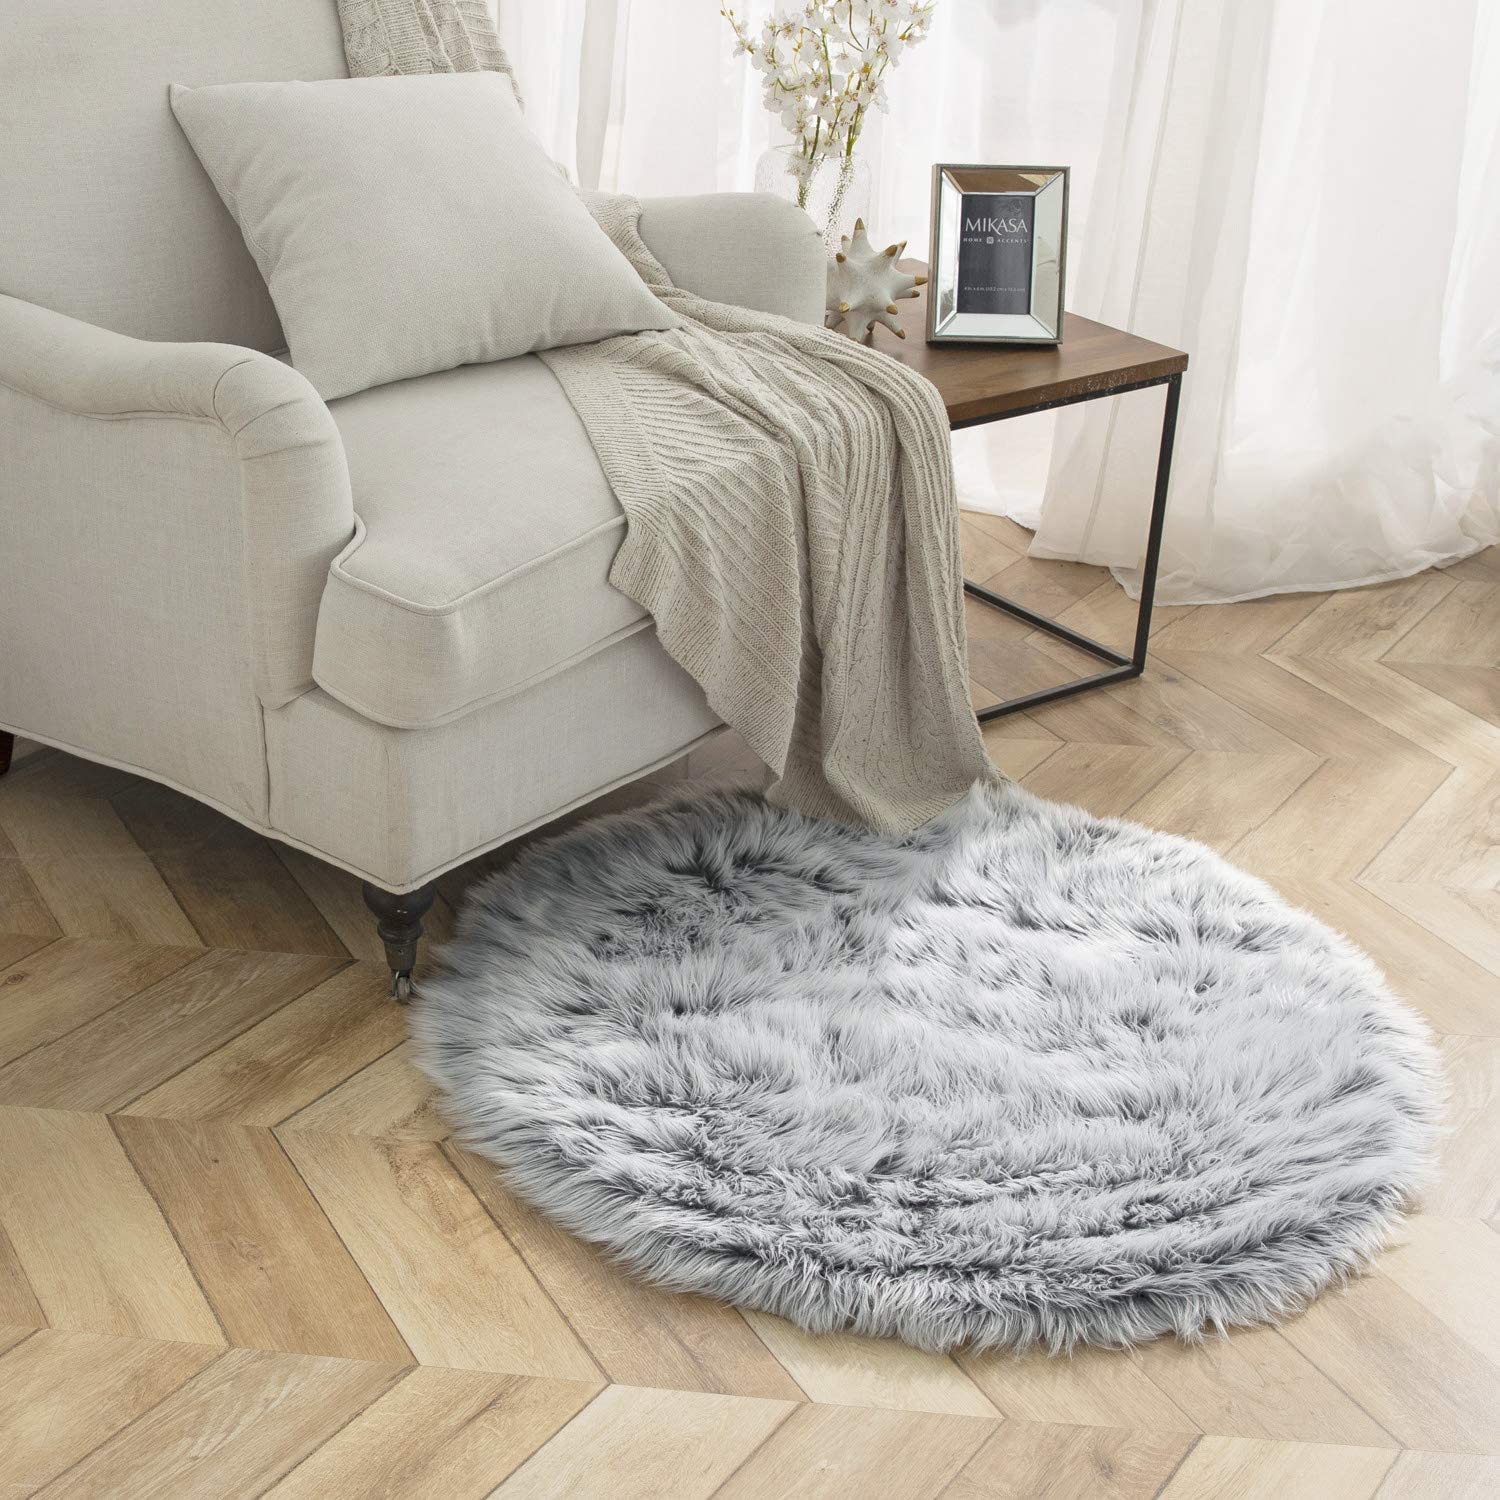 Photo 1 of Super Soft Grey Round Faux Fur Area Rugs Fuzzy Fluffy Sheepskin Carpet Shaggy Furry Floor Mat for Nursery Rugs Living Room Bedroom Bedside 6 ROUND